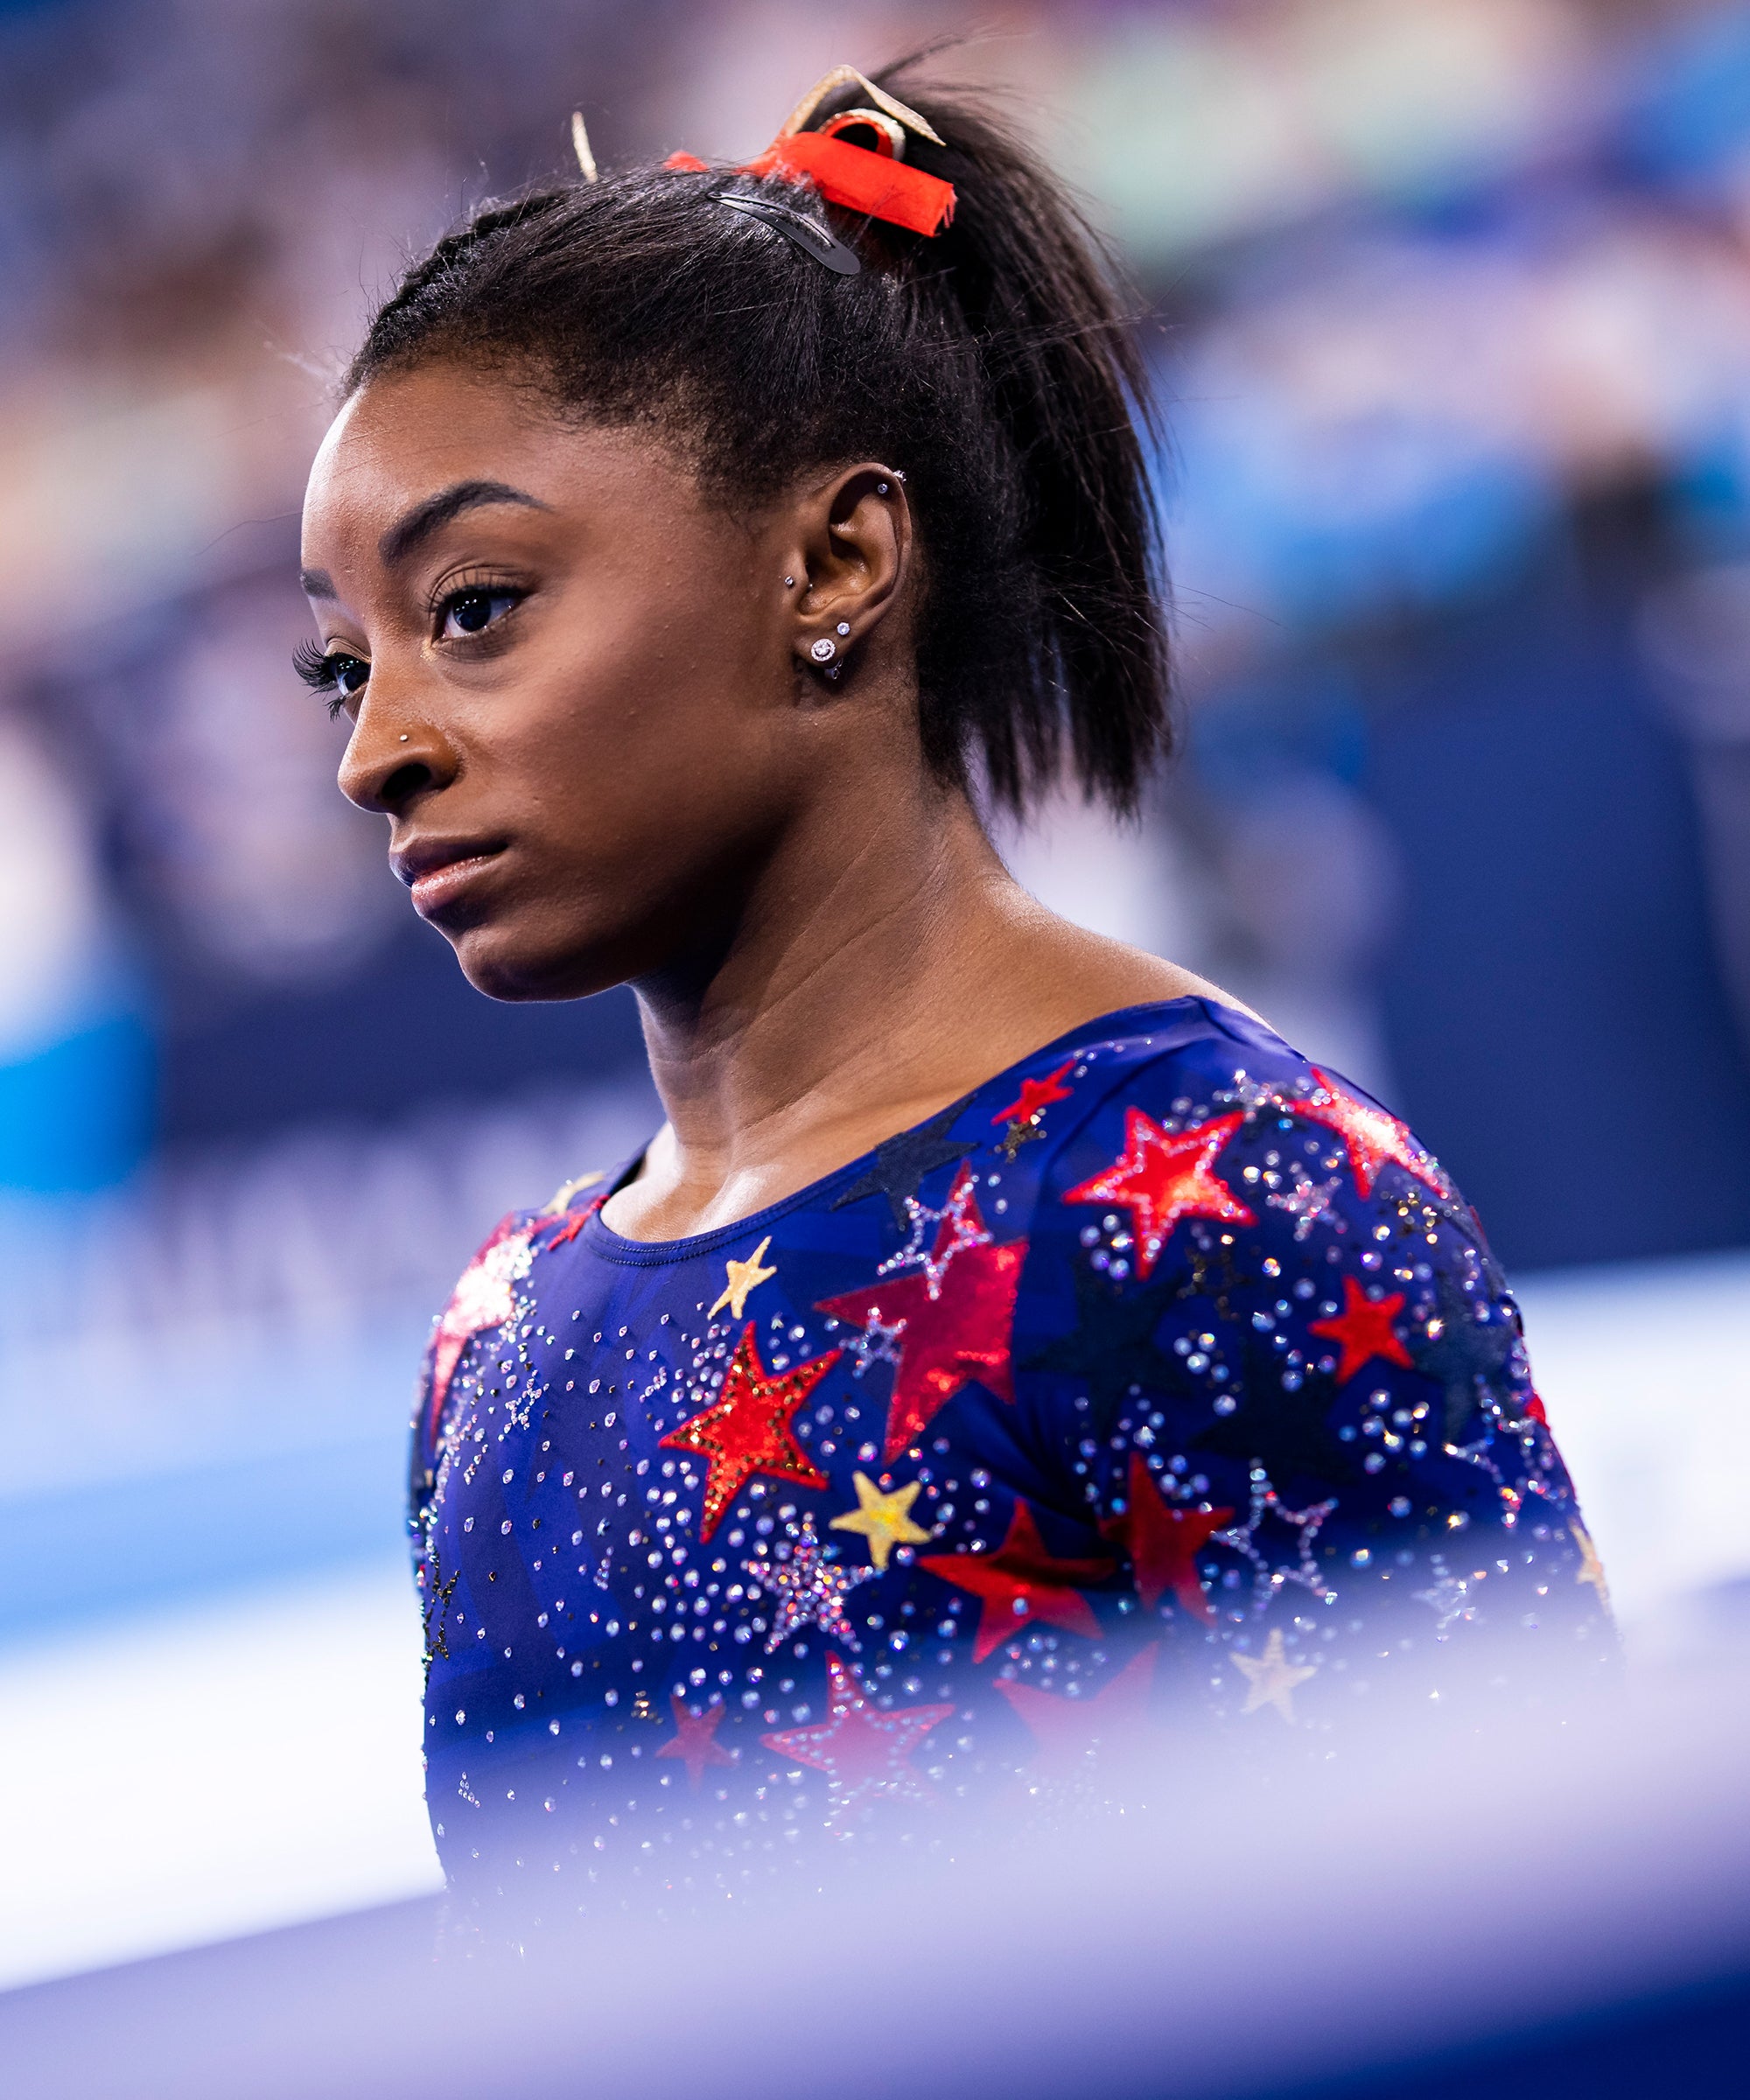 Simone Biles to Return to Competitive Gymnastics After Olympics Exit